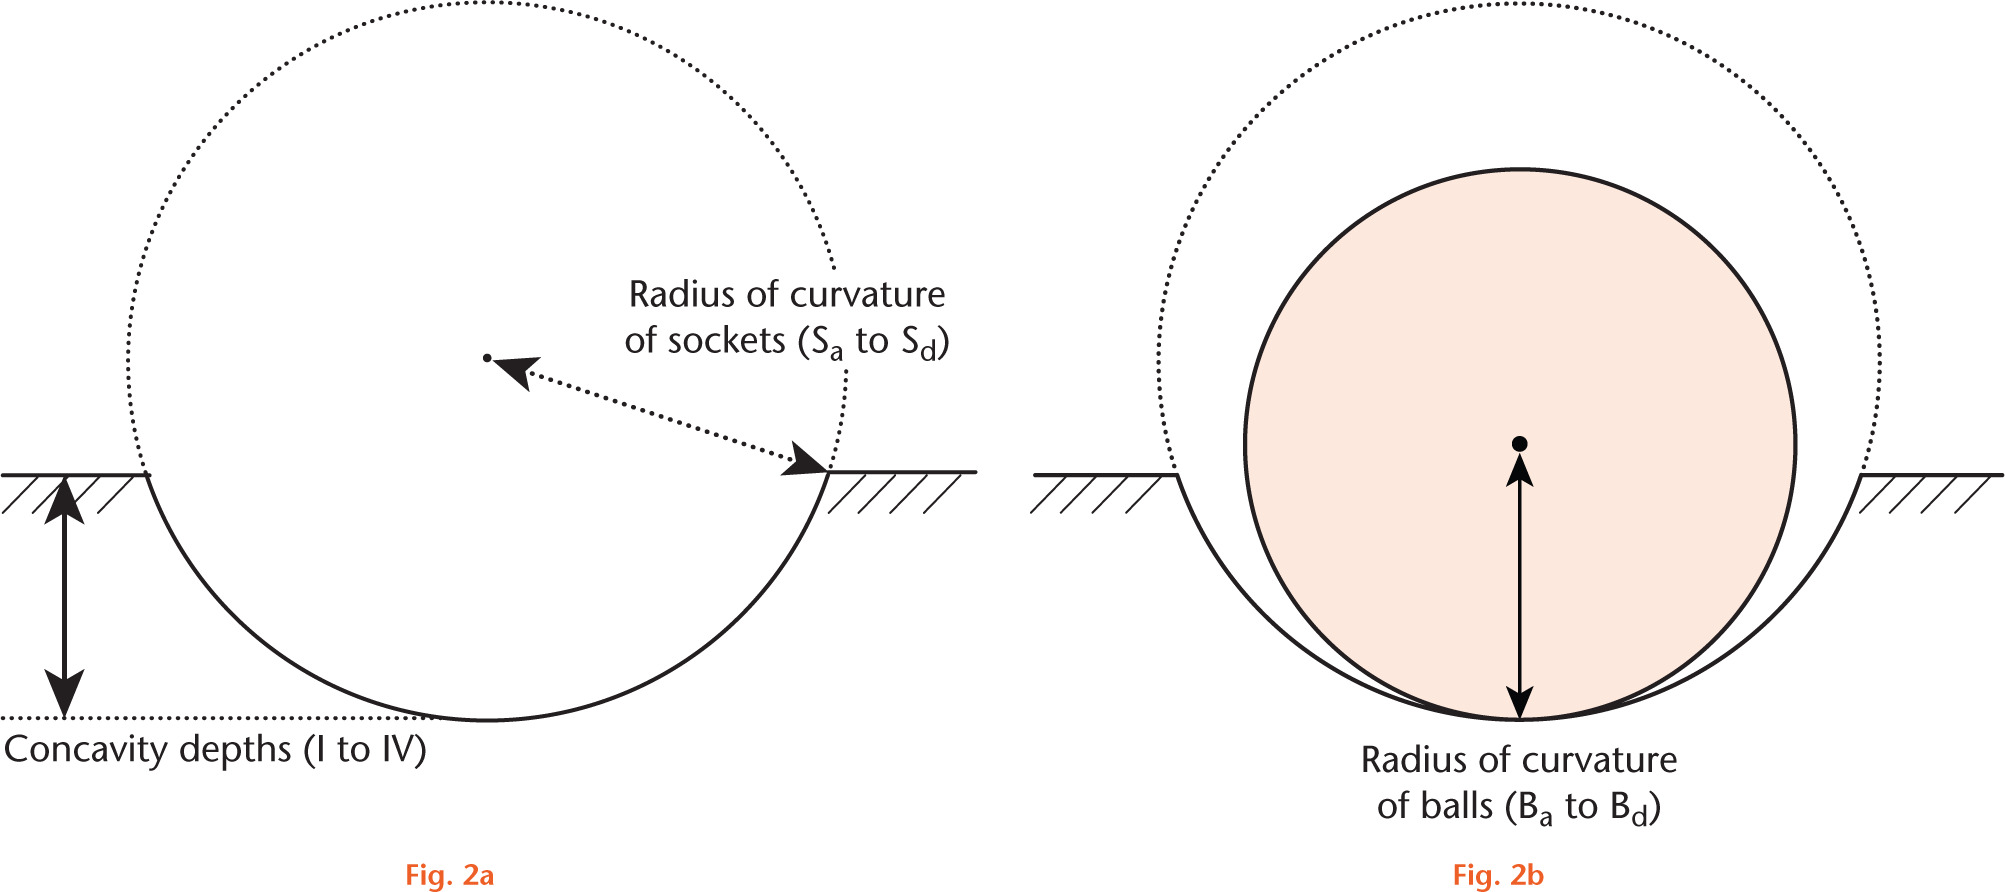  
            The radii of curvature of the ball (Ba to Bd) and socket (Sa to Sd), and its concavity depths (I to IV) are shown; a) the radius of the socket (dashed arrow) is the circumference, depicted by the socket and the dashed circle arc, starting from the socket’s rim. The radius of the ball matches the circumference; b) in an incongruent system, the radius of the ball (continuous arrow and circumference) does not match the socket’s circumference depicted by the socket and dashed circle arc.
          